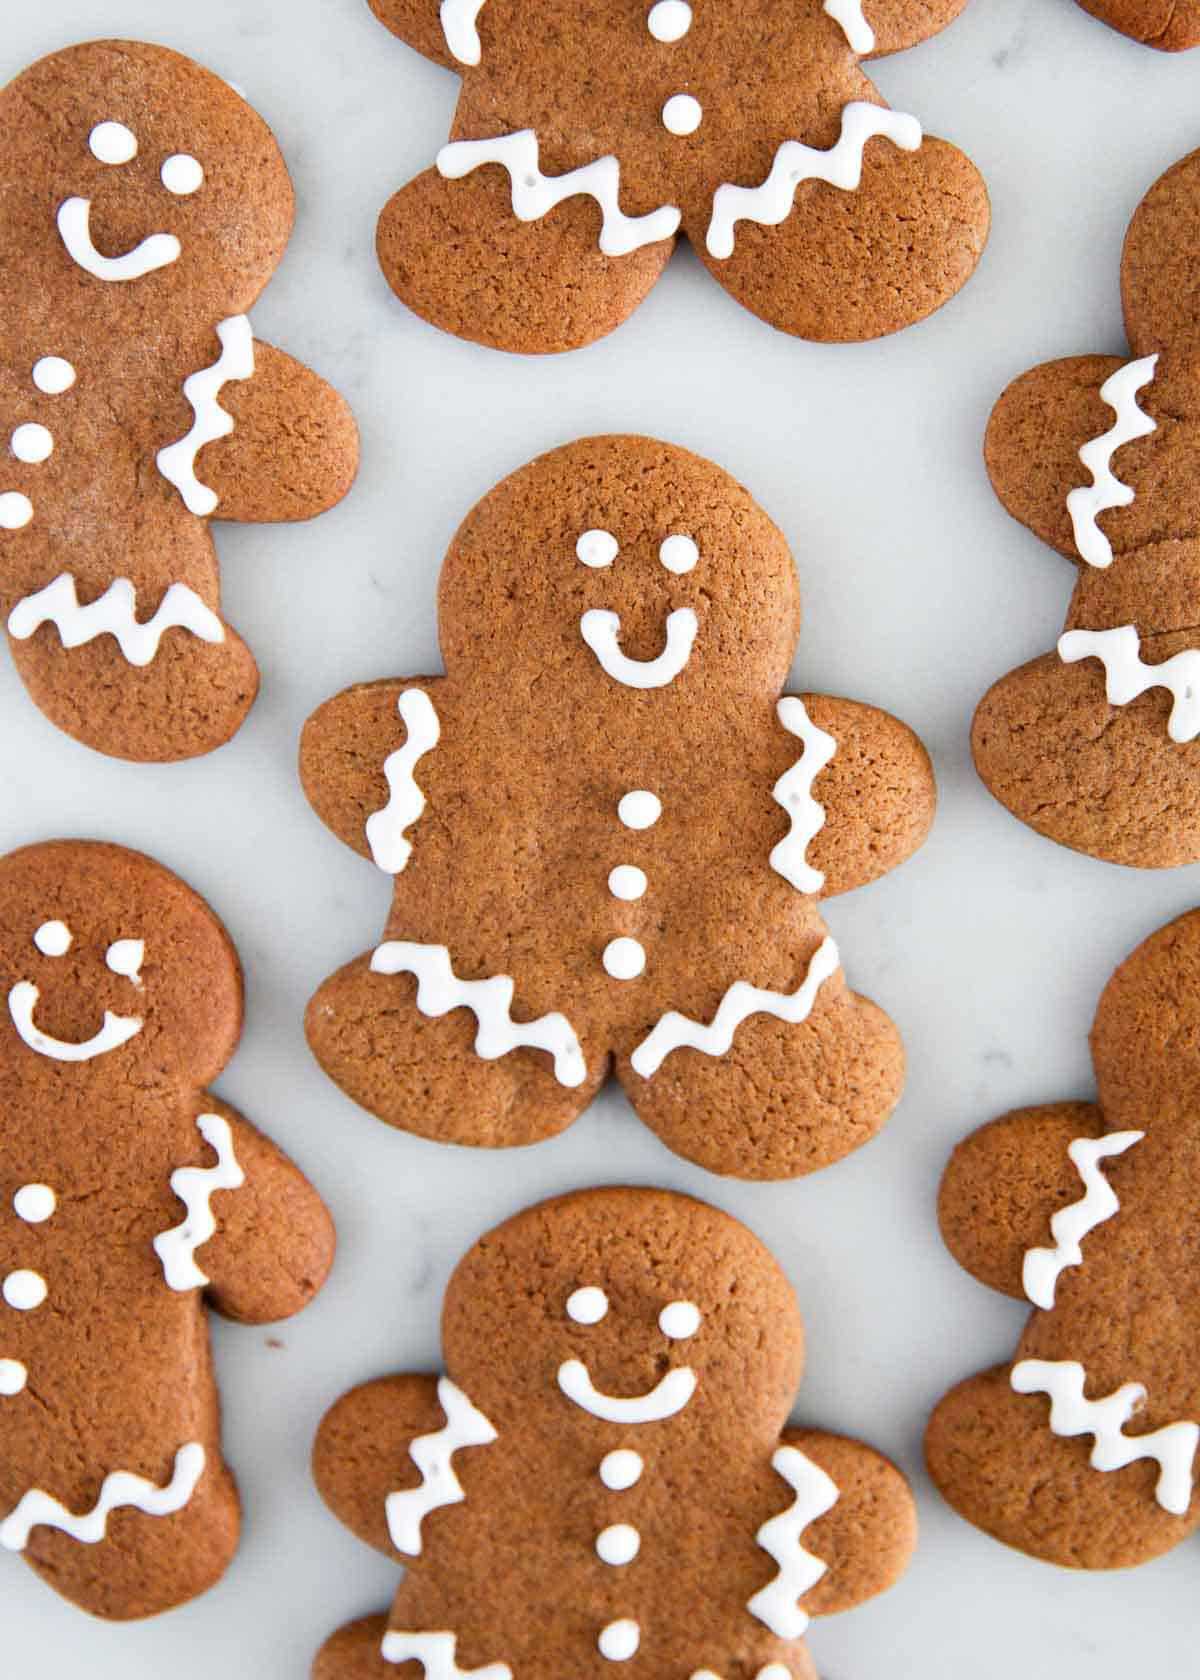 Gingerbread man cookies on counter.